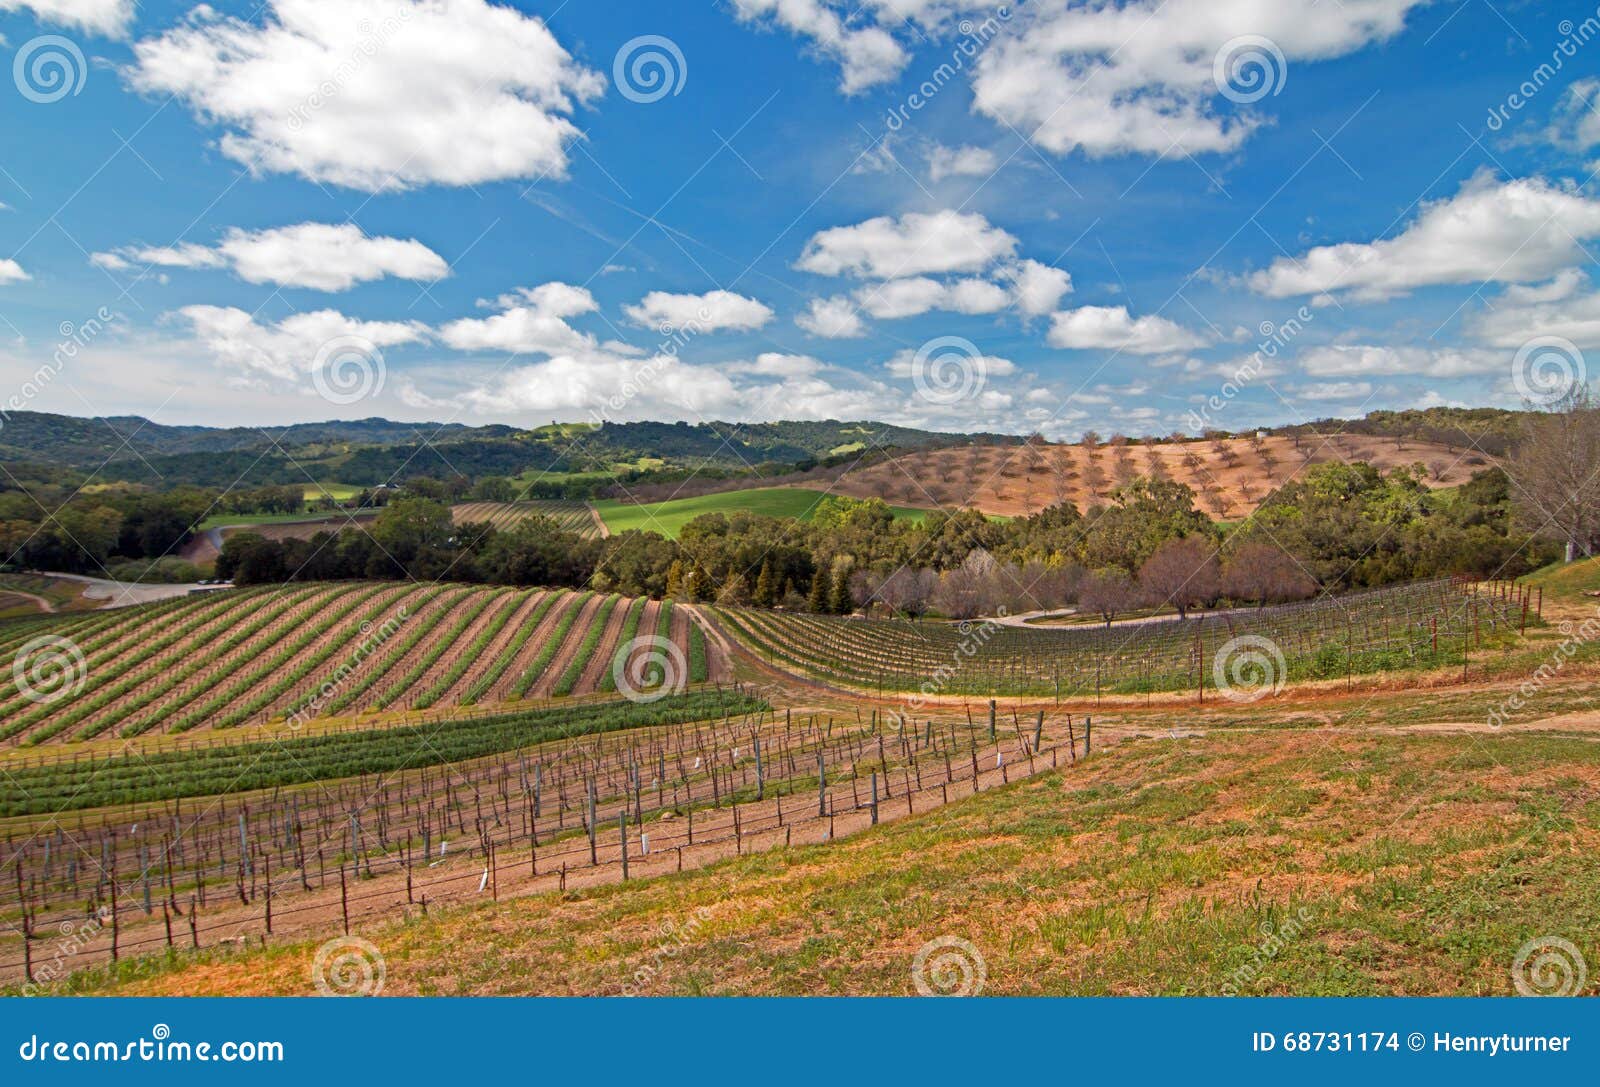 vineyards in paso robles wine country scenery